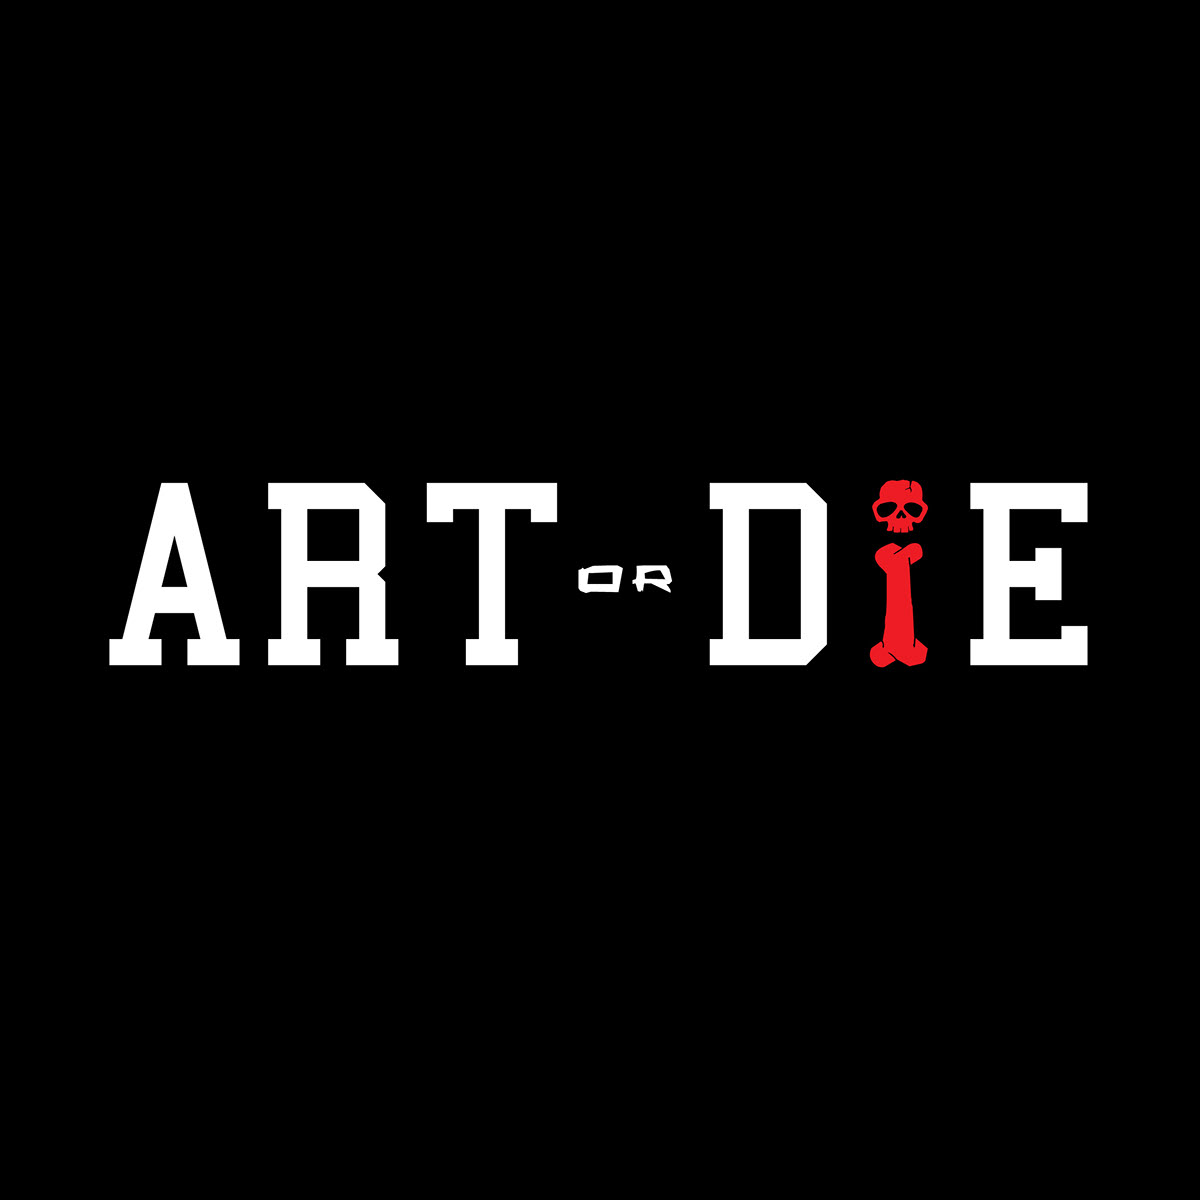 art Or logo campaign graphic mission Cause die black White grey red